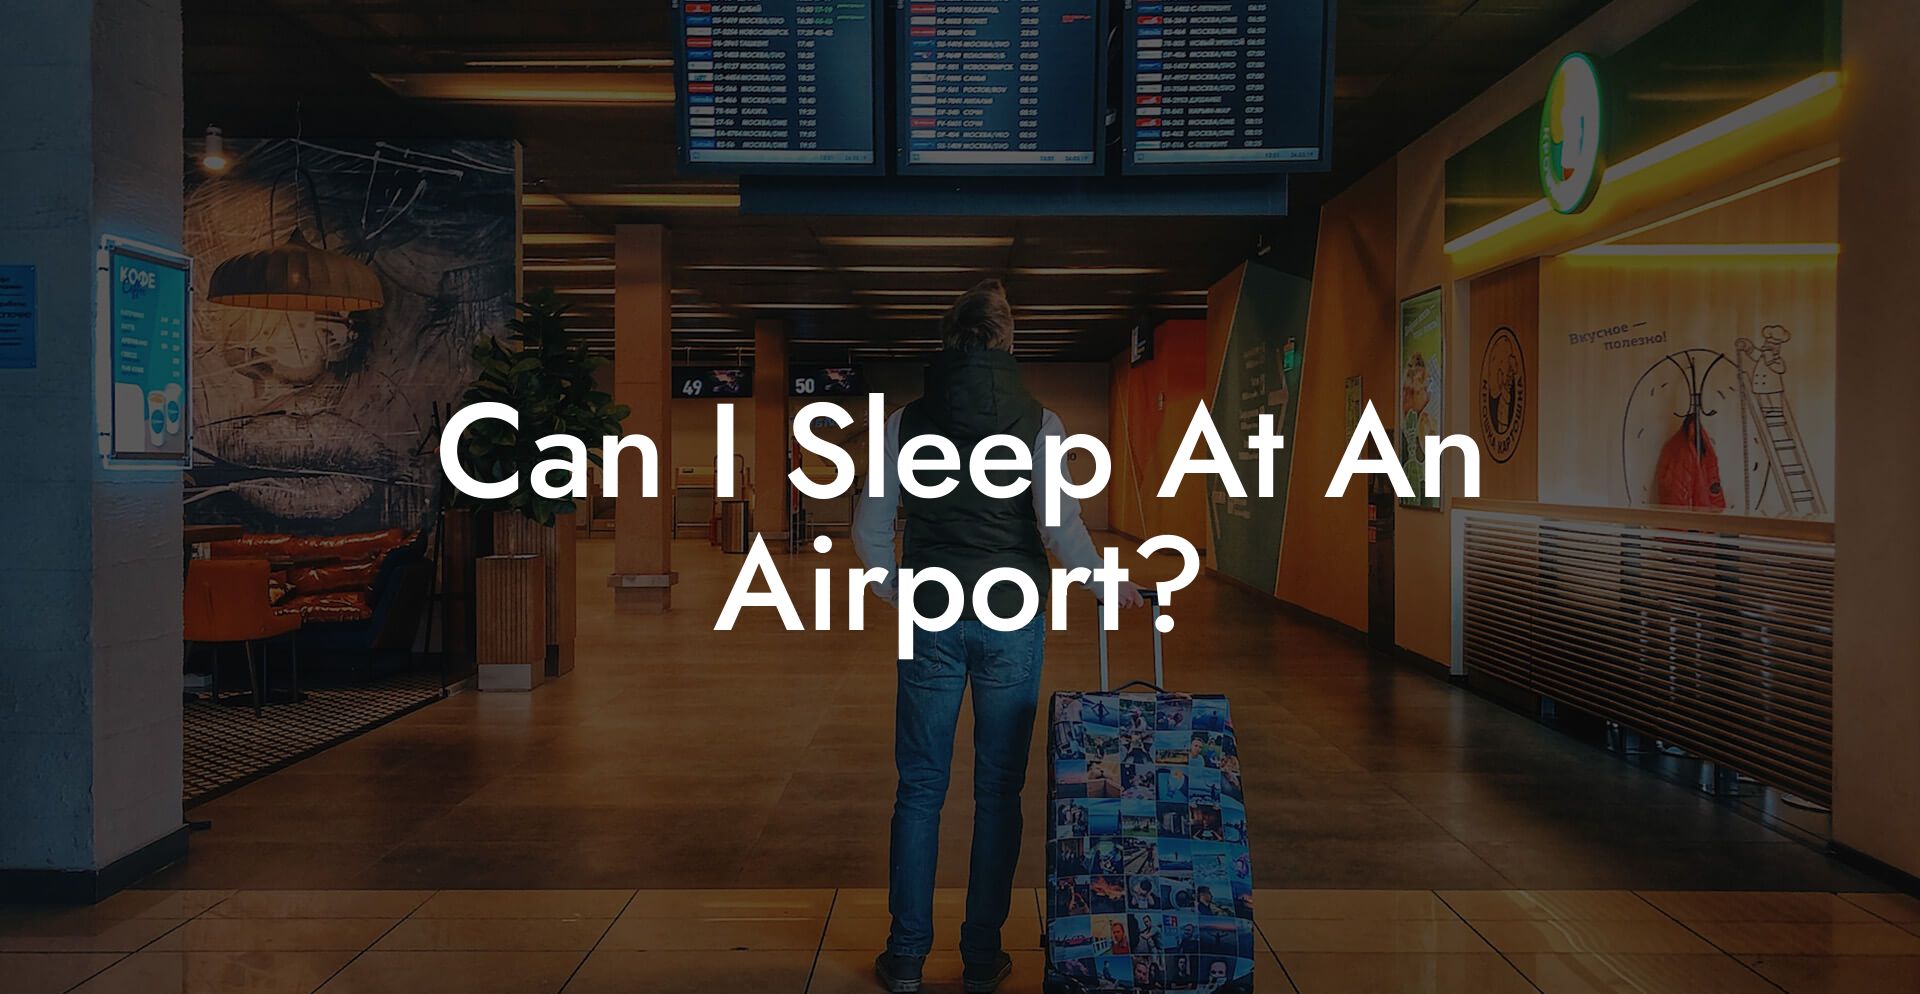 Can I Sleep At An Airport?